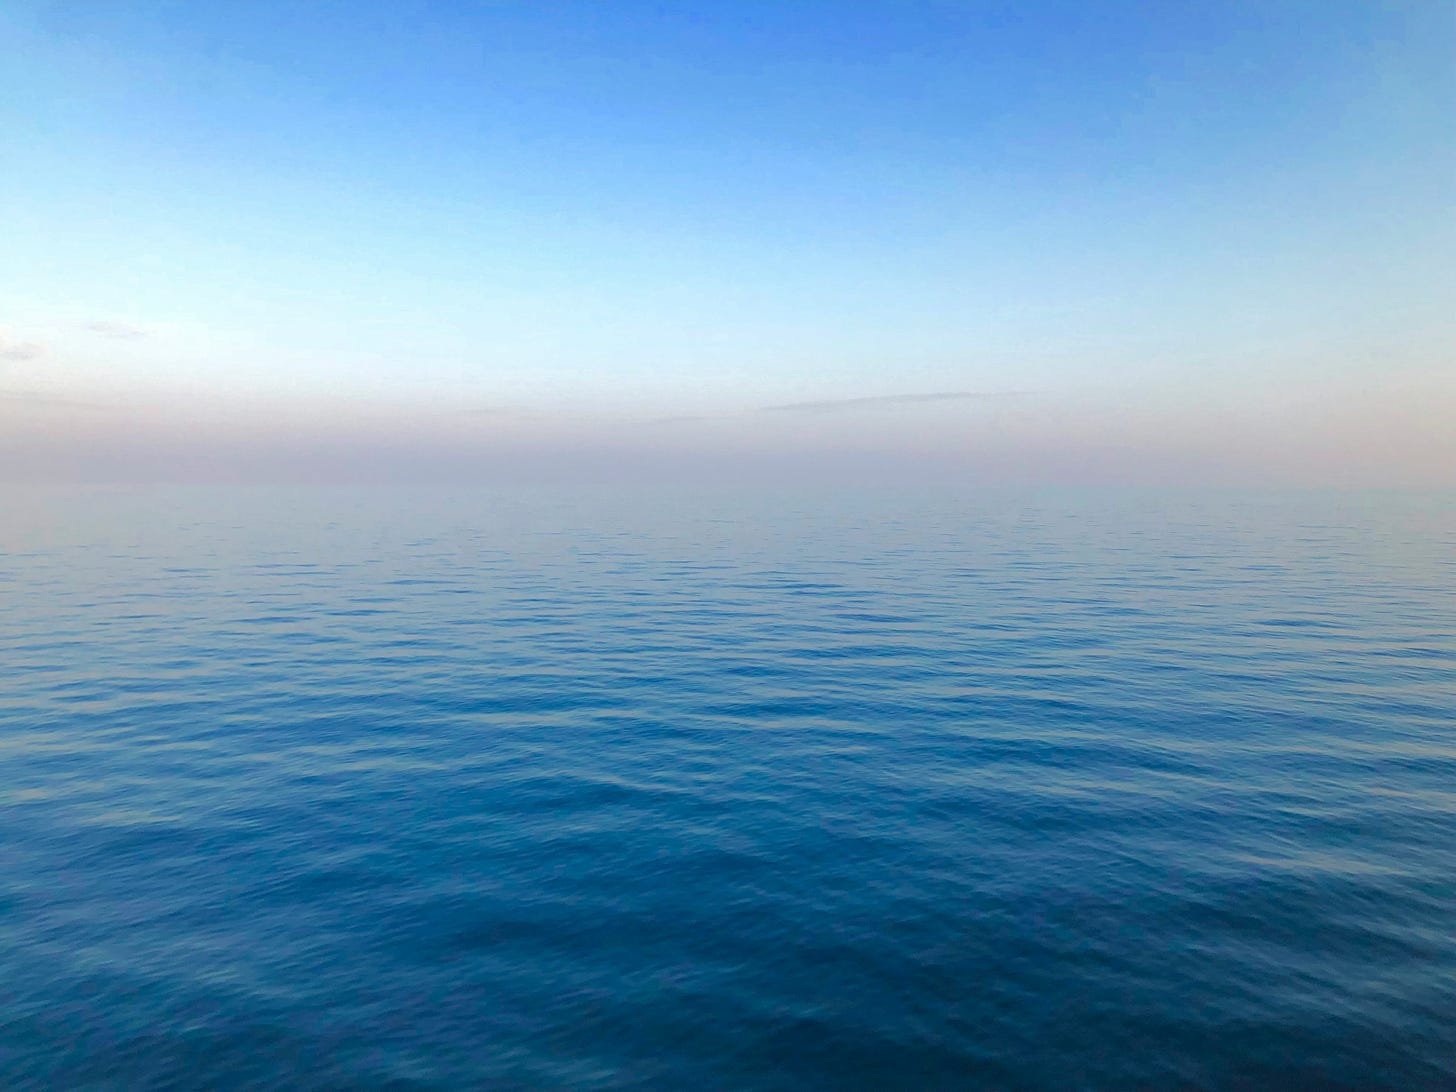  A misty, hazy horizon line out on the Mediterranean Sea. The muted steel-blue of the water turns into soft grey-pinks at the horizon line. There may or may not be land out there at the edge.